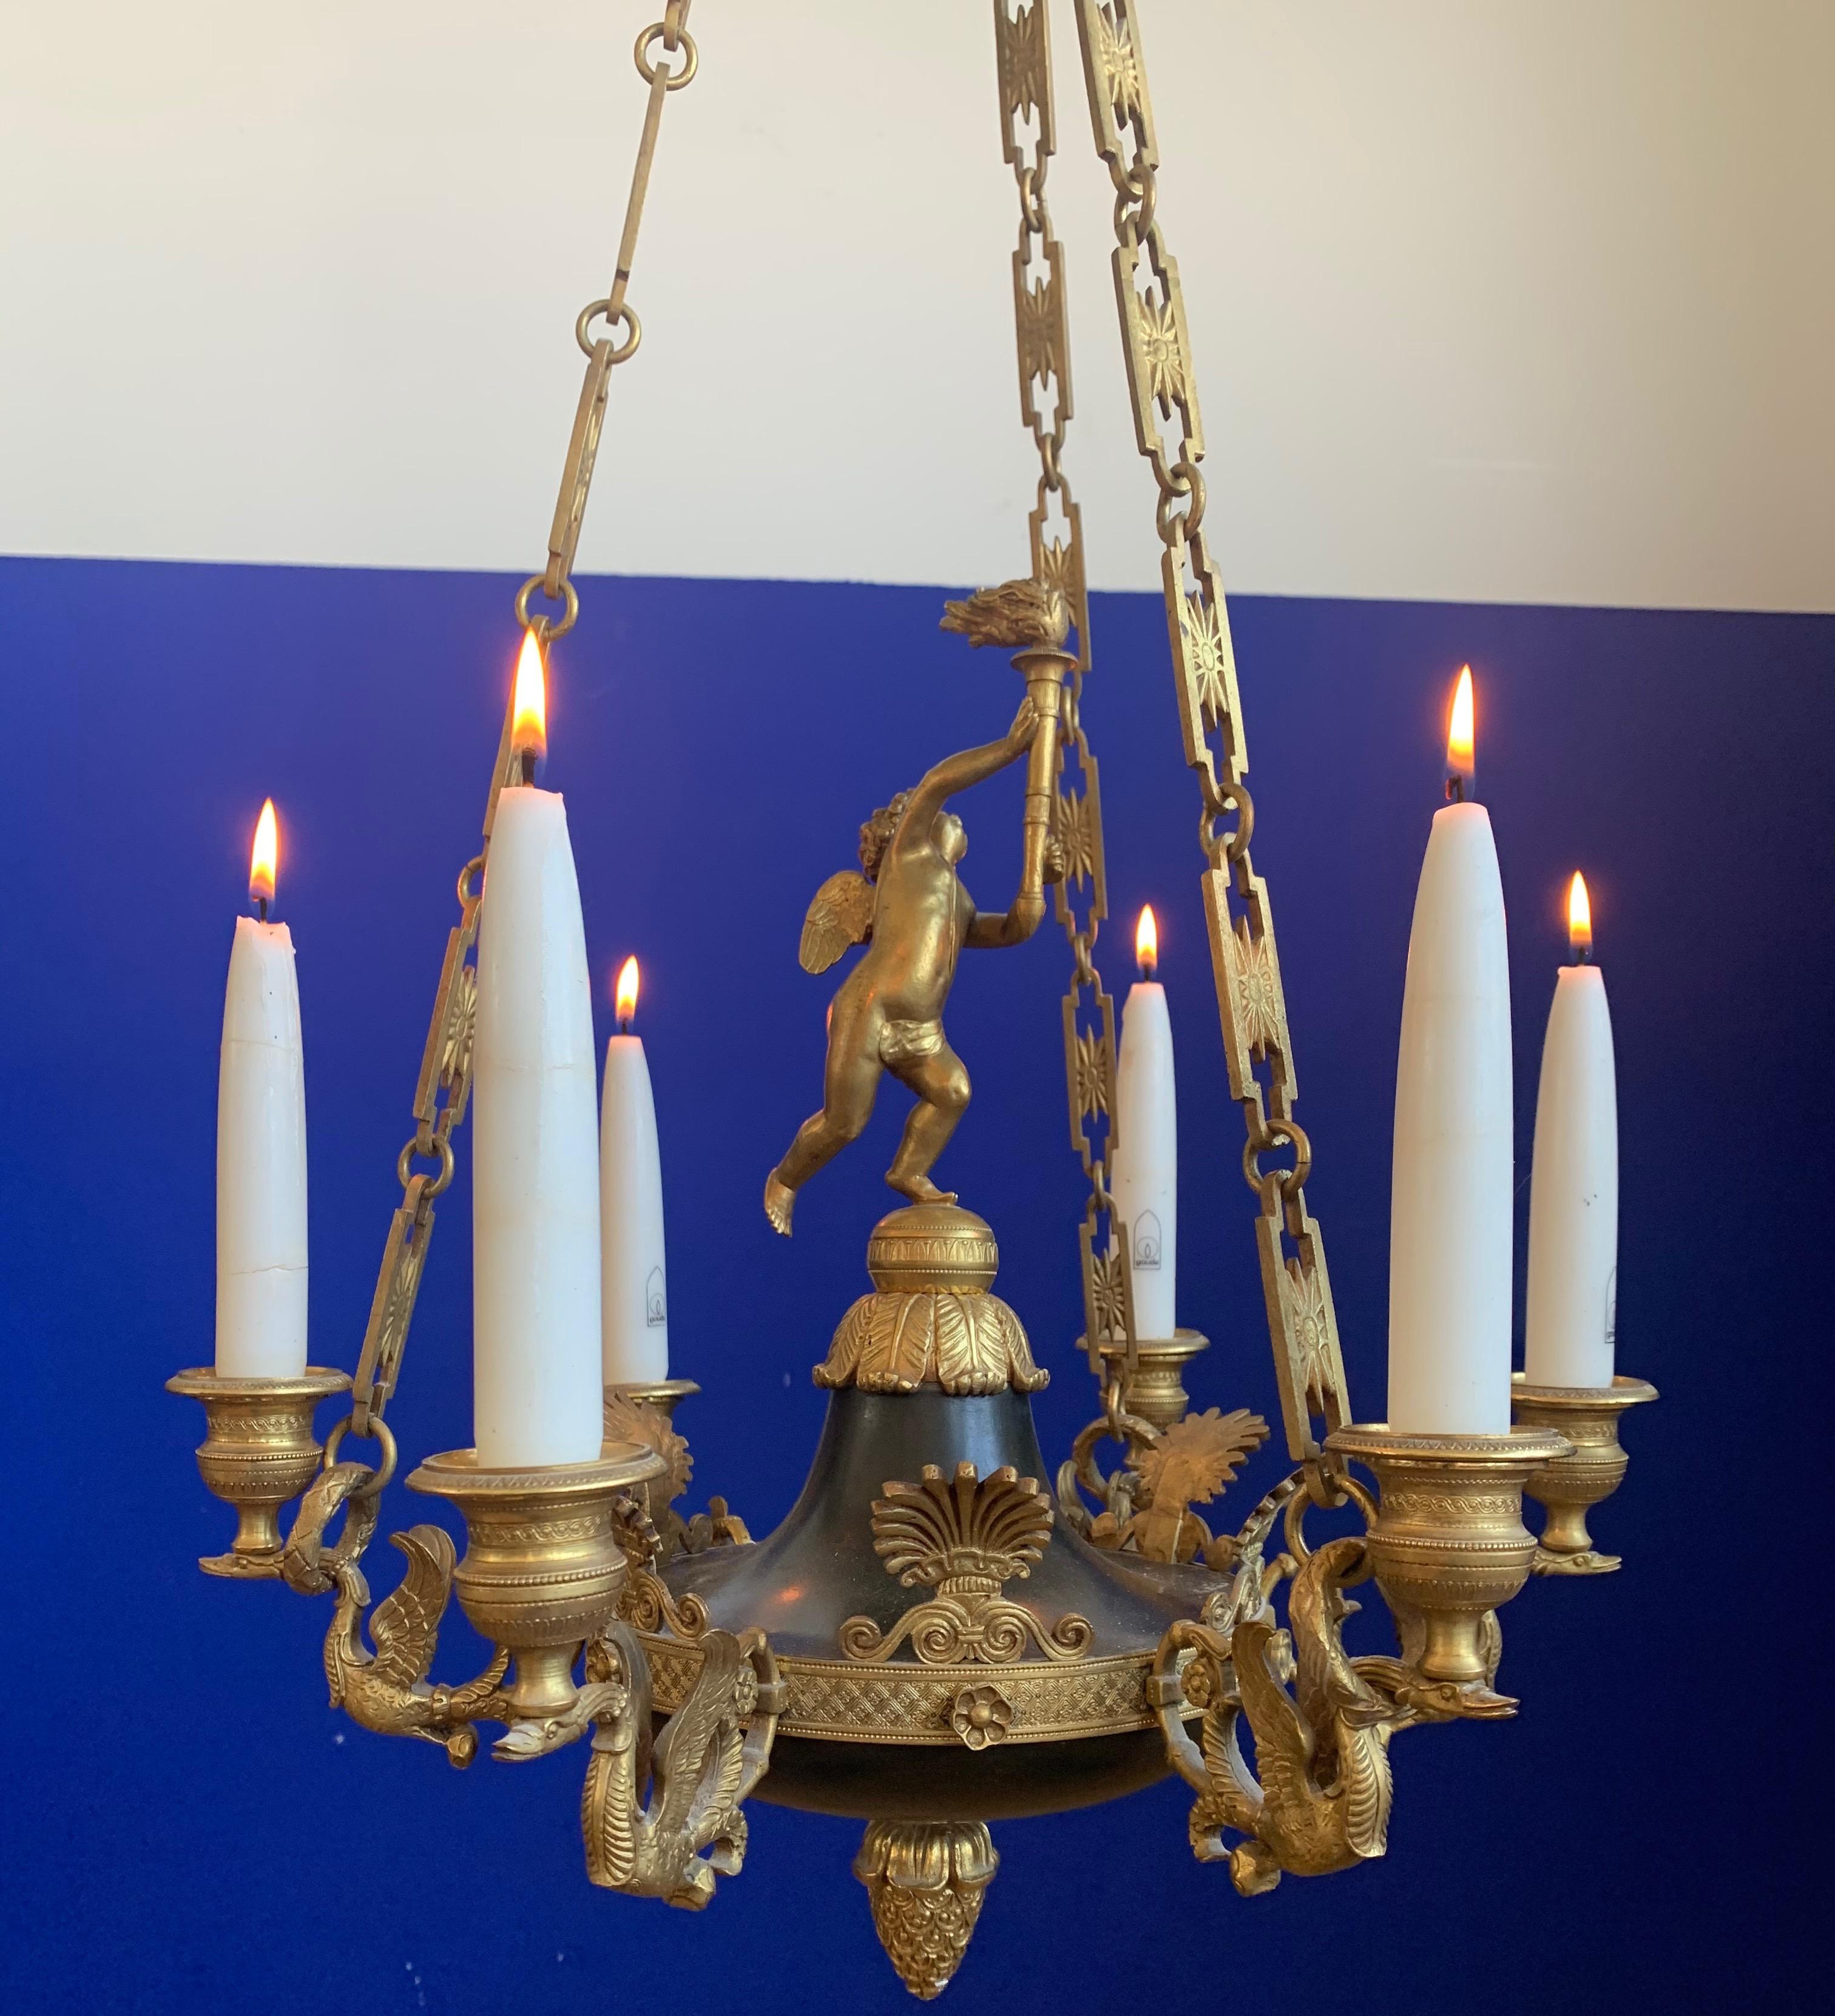 Antique French Empire Gilt Bronze Candle Pendant Light or Chandelier with Cherub For Sale 1